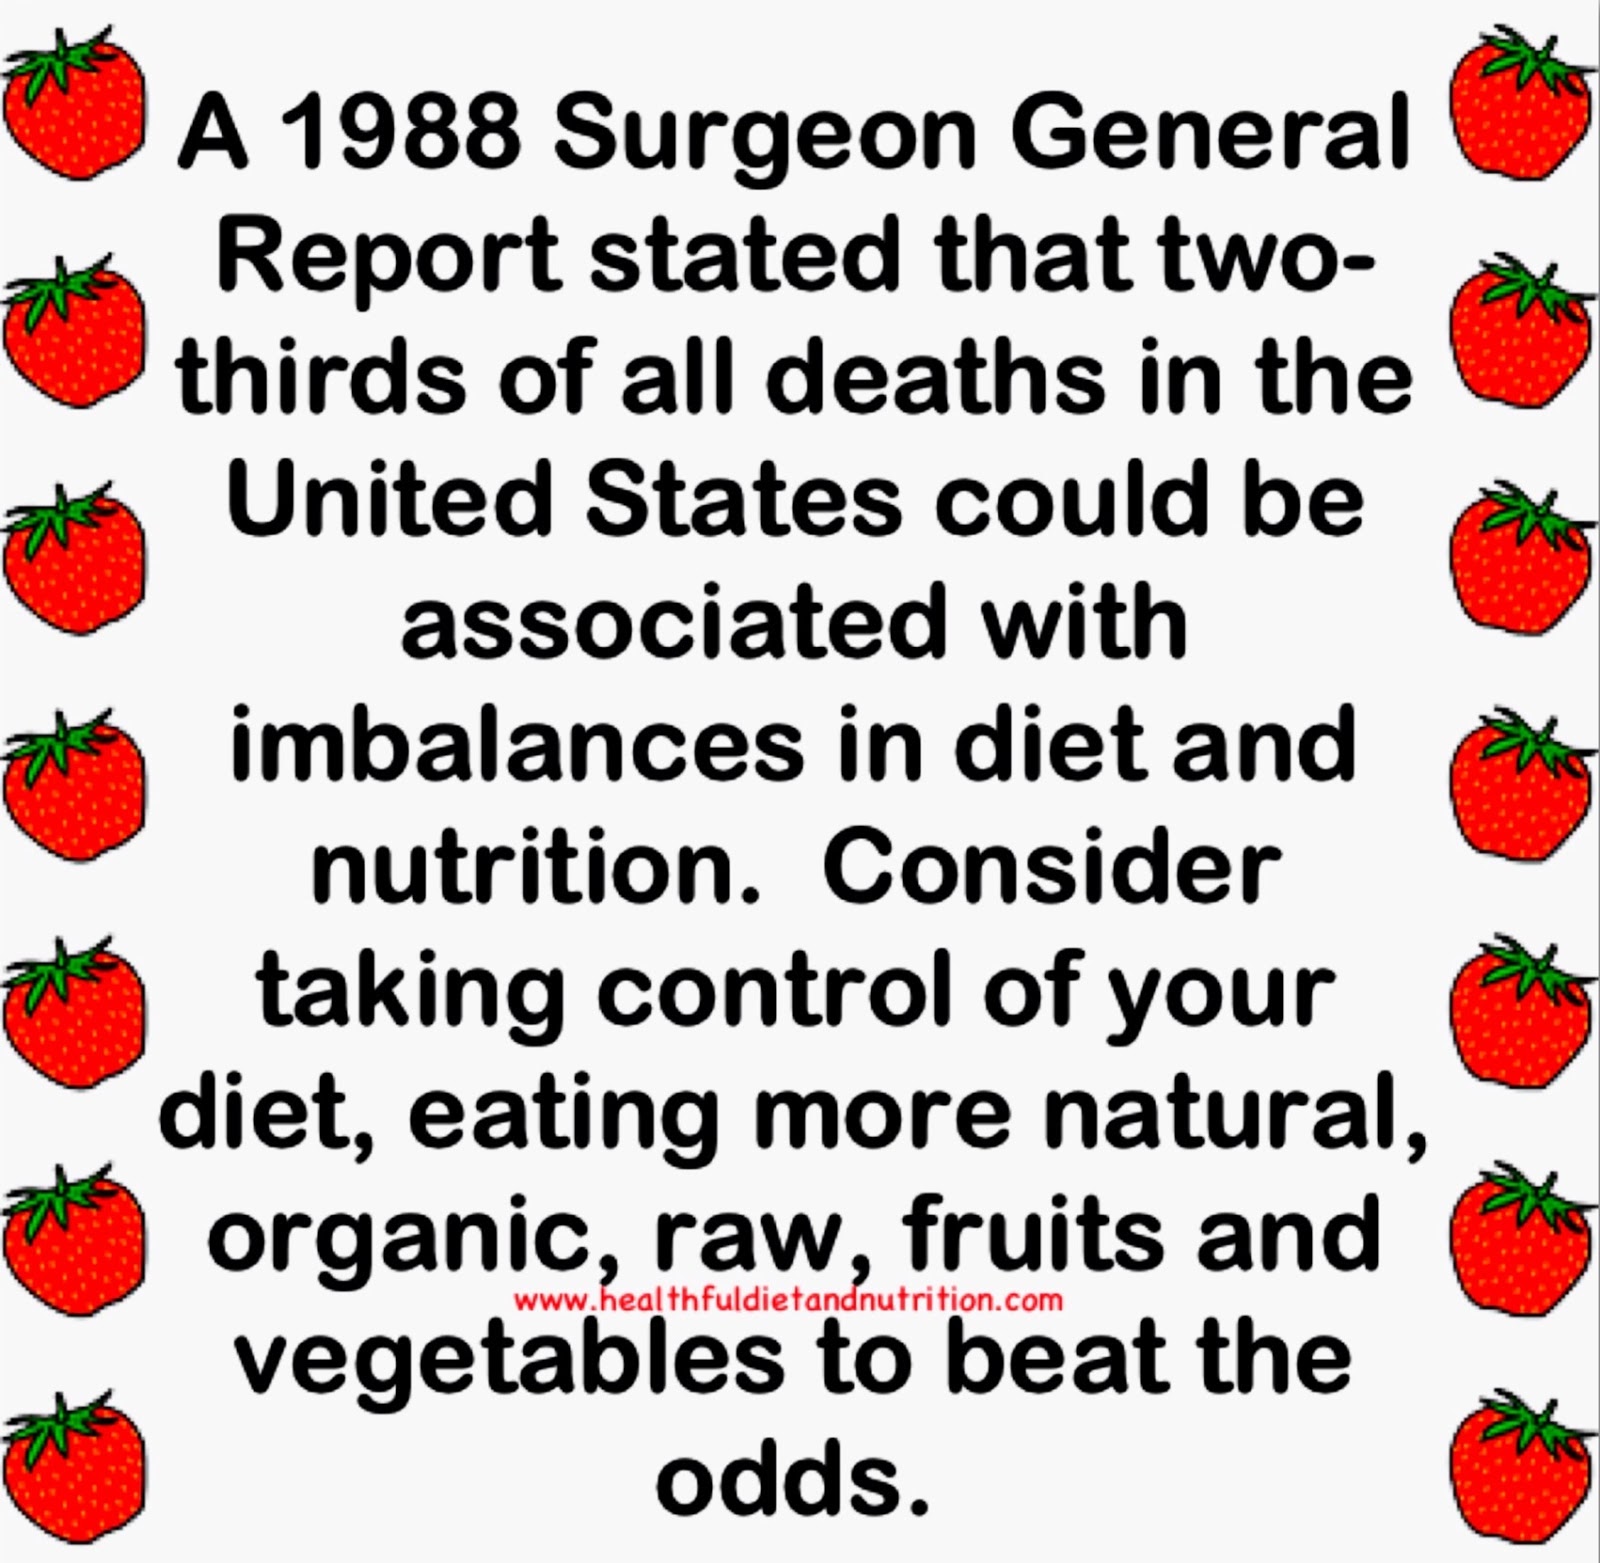 Consider Taking Control of Your Diet